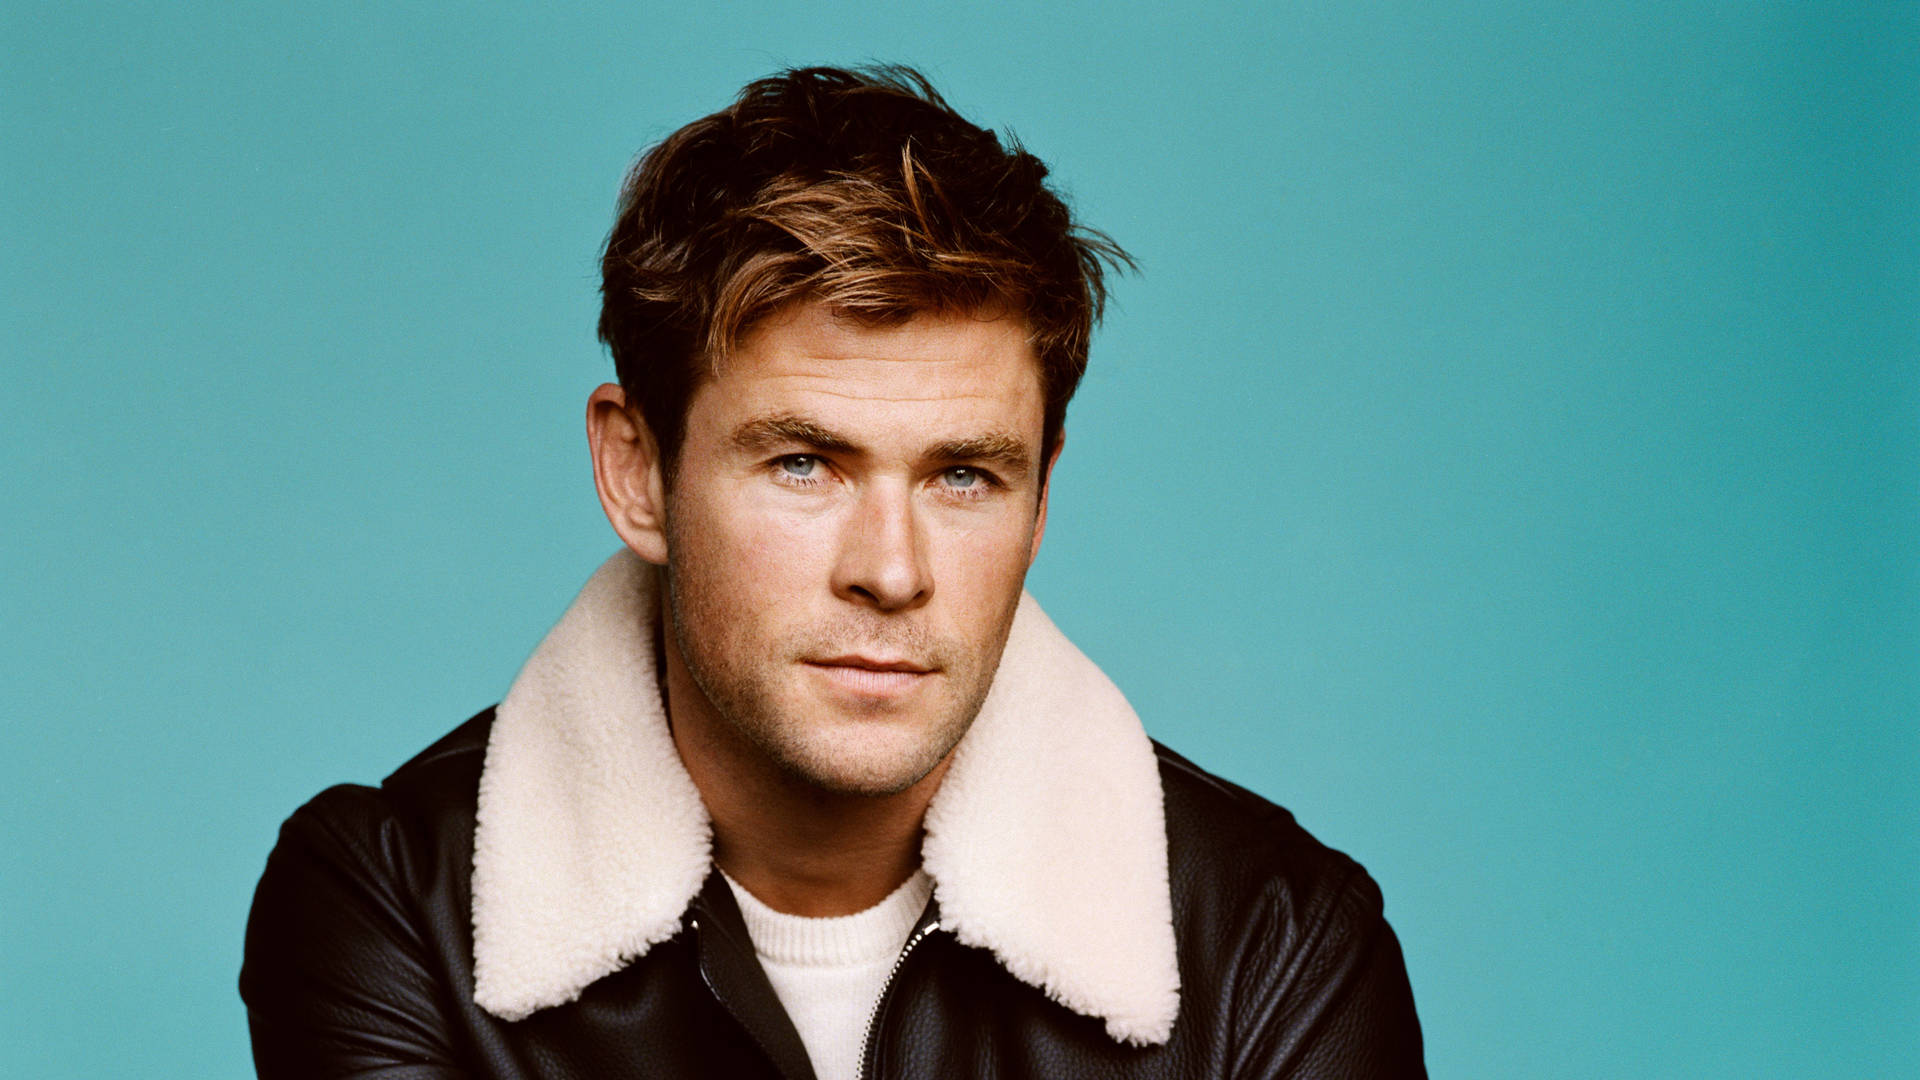 Chris Hemsworth In Fur And Leather Jacket Wallpaper